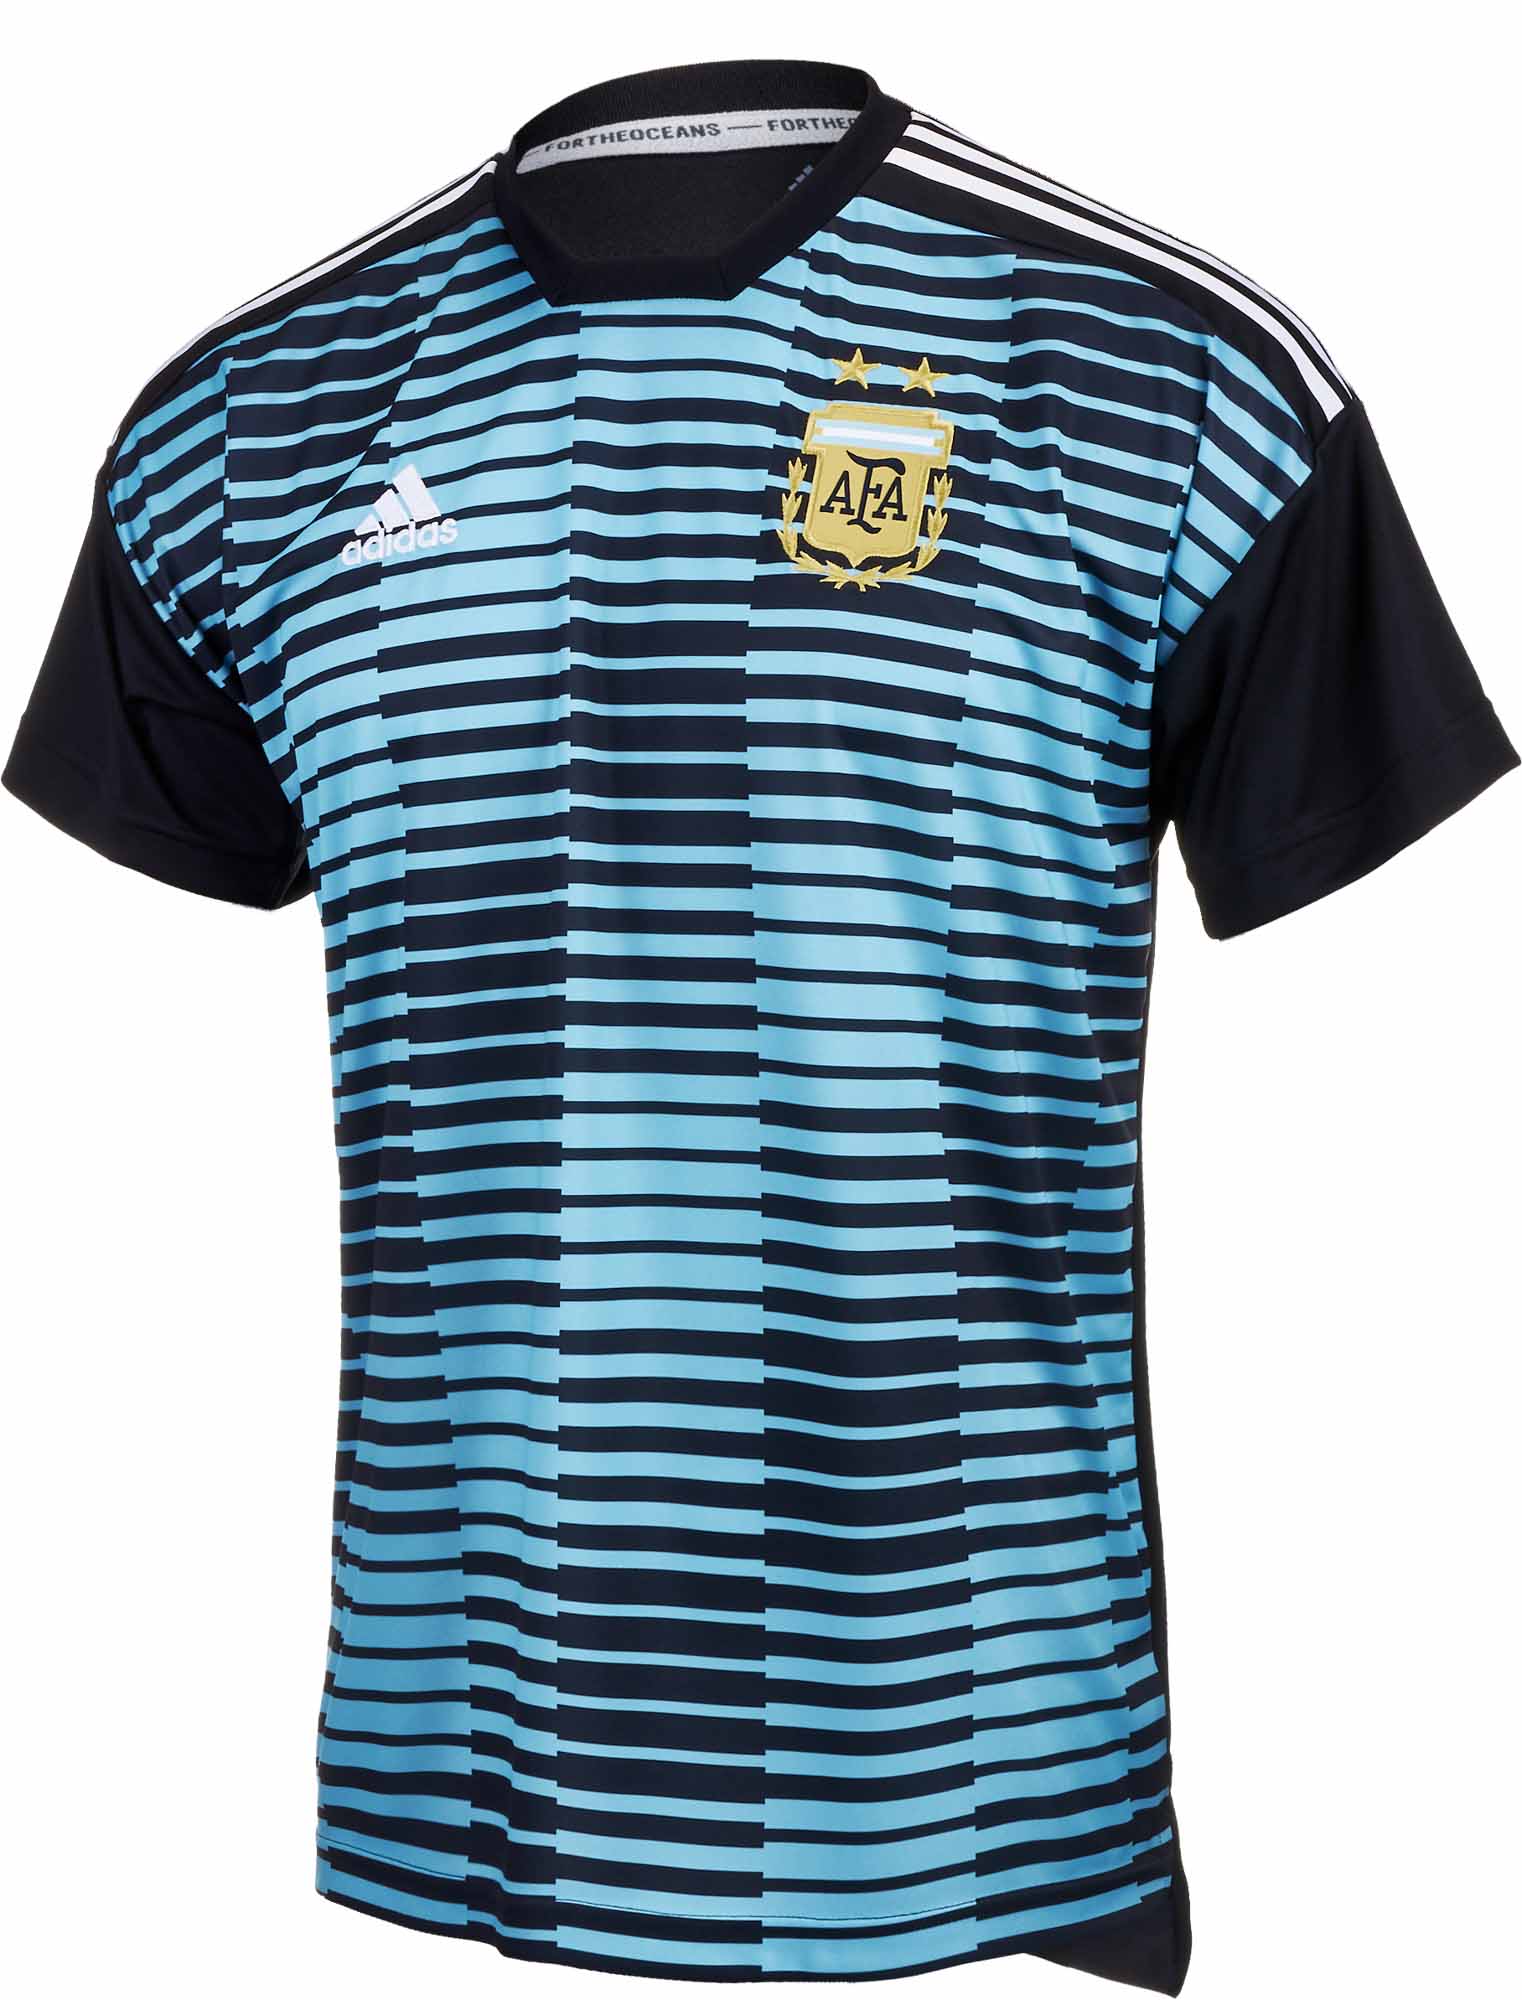 adidas messi jersey youth